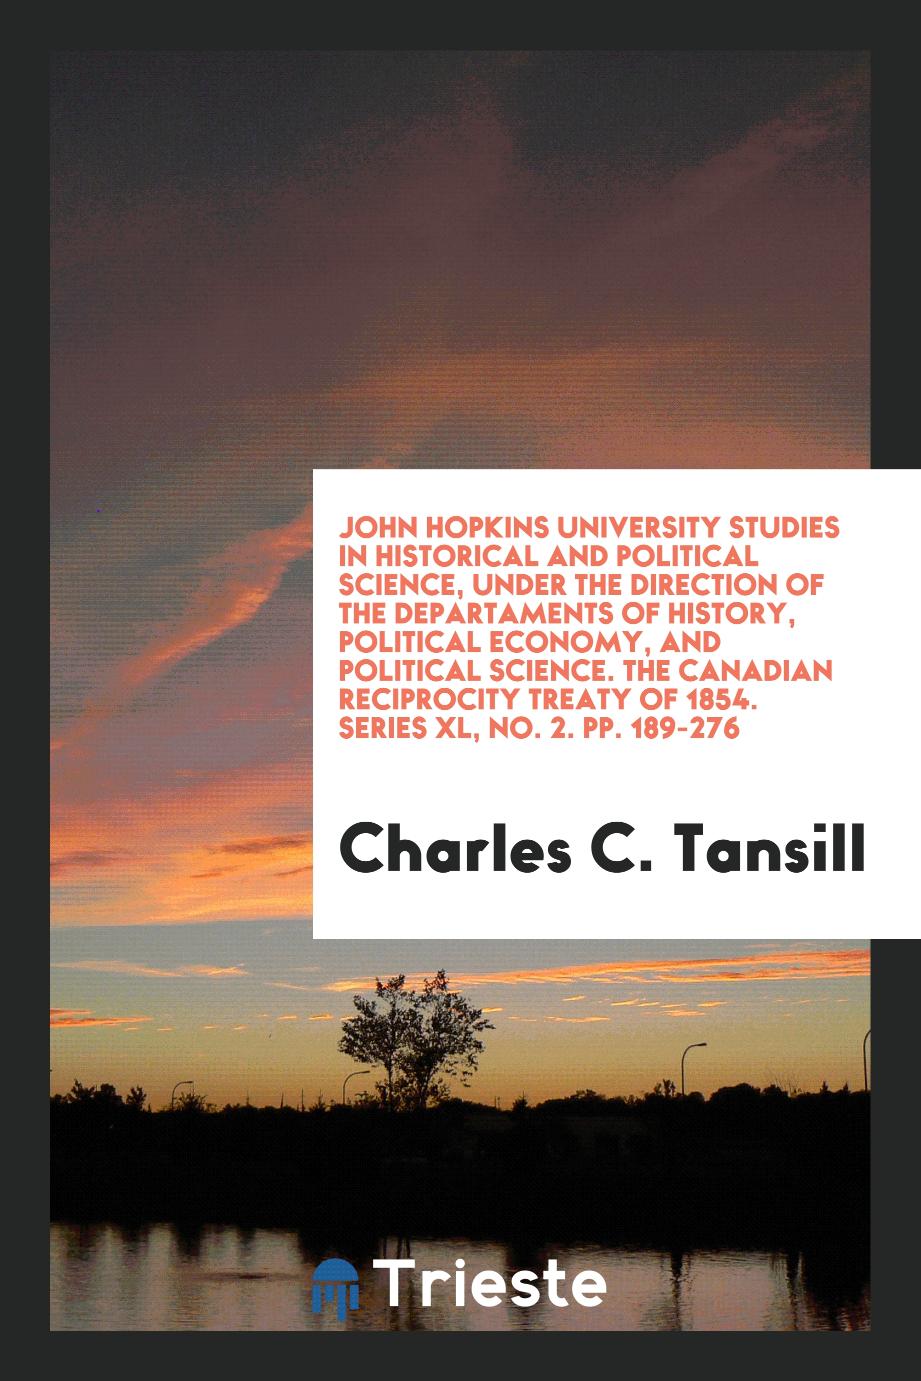 John Hopkins University Studies in Historical and Political Science, under the Direction of the Departaments of History, Political Economy, and Political Science. The Canadian reciprocity treaty of 1854. Series XL, No. 2. pp. 189-276